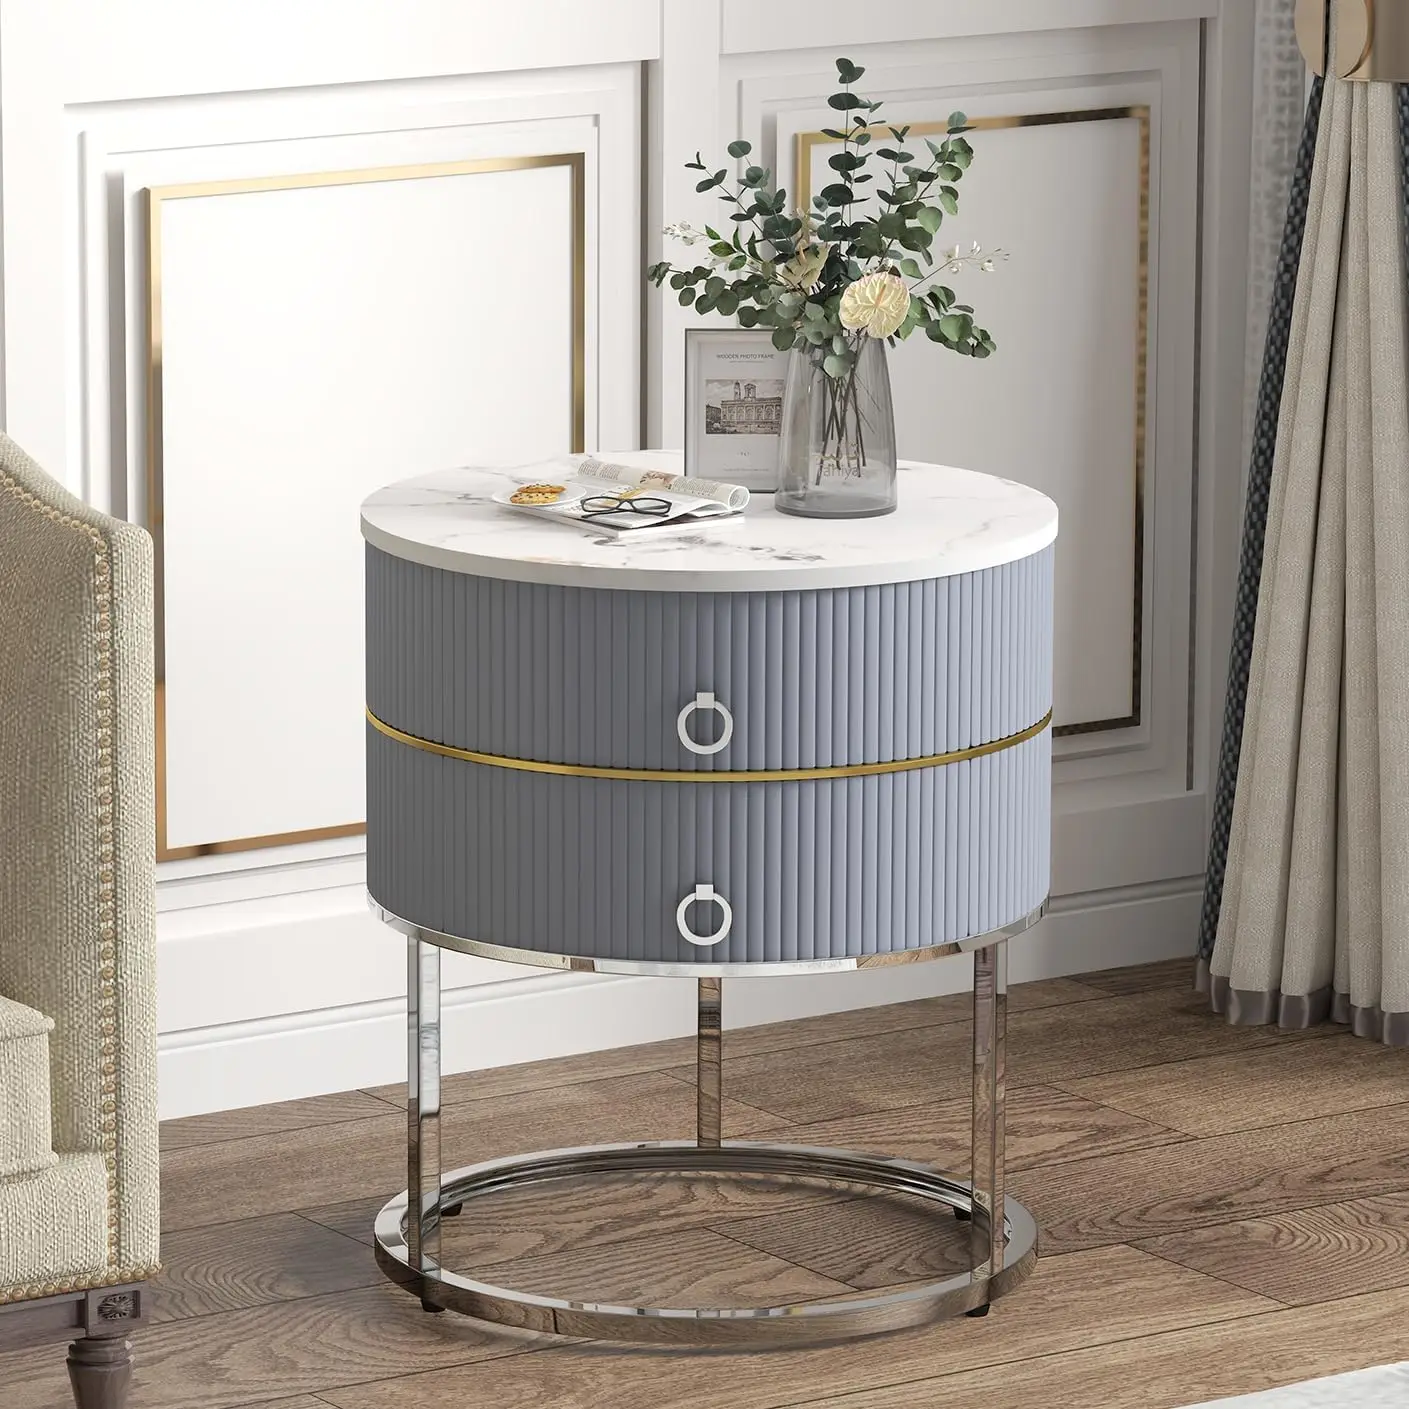 

Marble Round End Table with Storage, Modern Nightstand with 2 Drawers, Side Table for Living Room Bed Room, Bedside Table